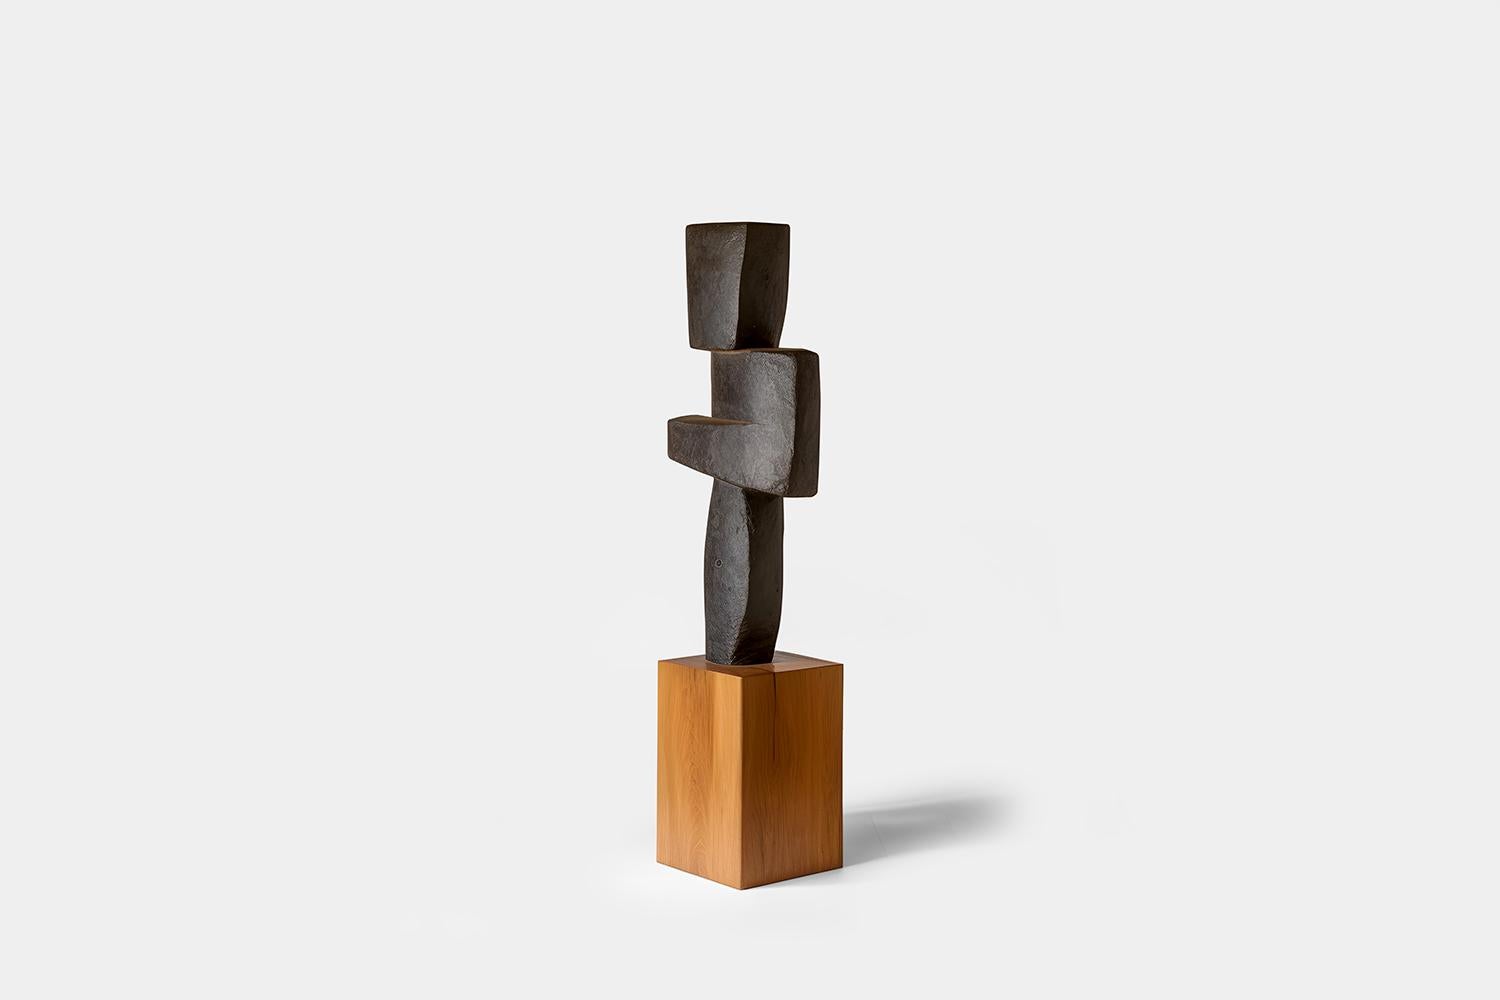 Biomorphic Carved Wood Sculpture in the style of Isamu Noguchi, Unseen Force 20 by Joel Escalona

This monolithic sculpture, designed by the talented Artist Joel Escalona, is a towering example of beauty in craftsmanship. Hand and digital machine